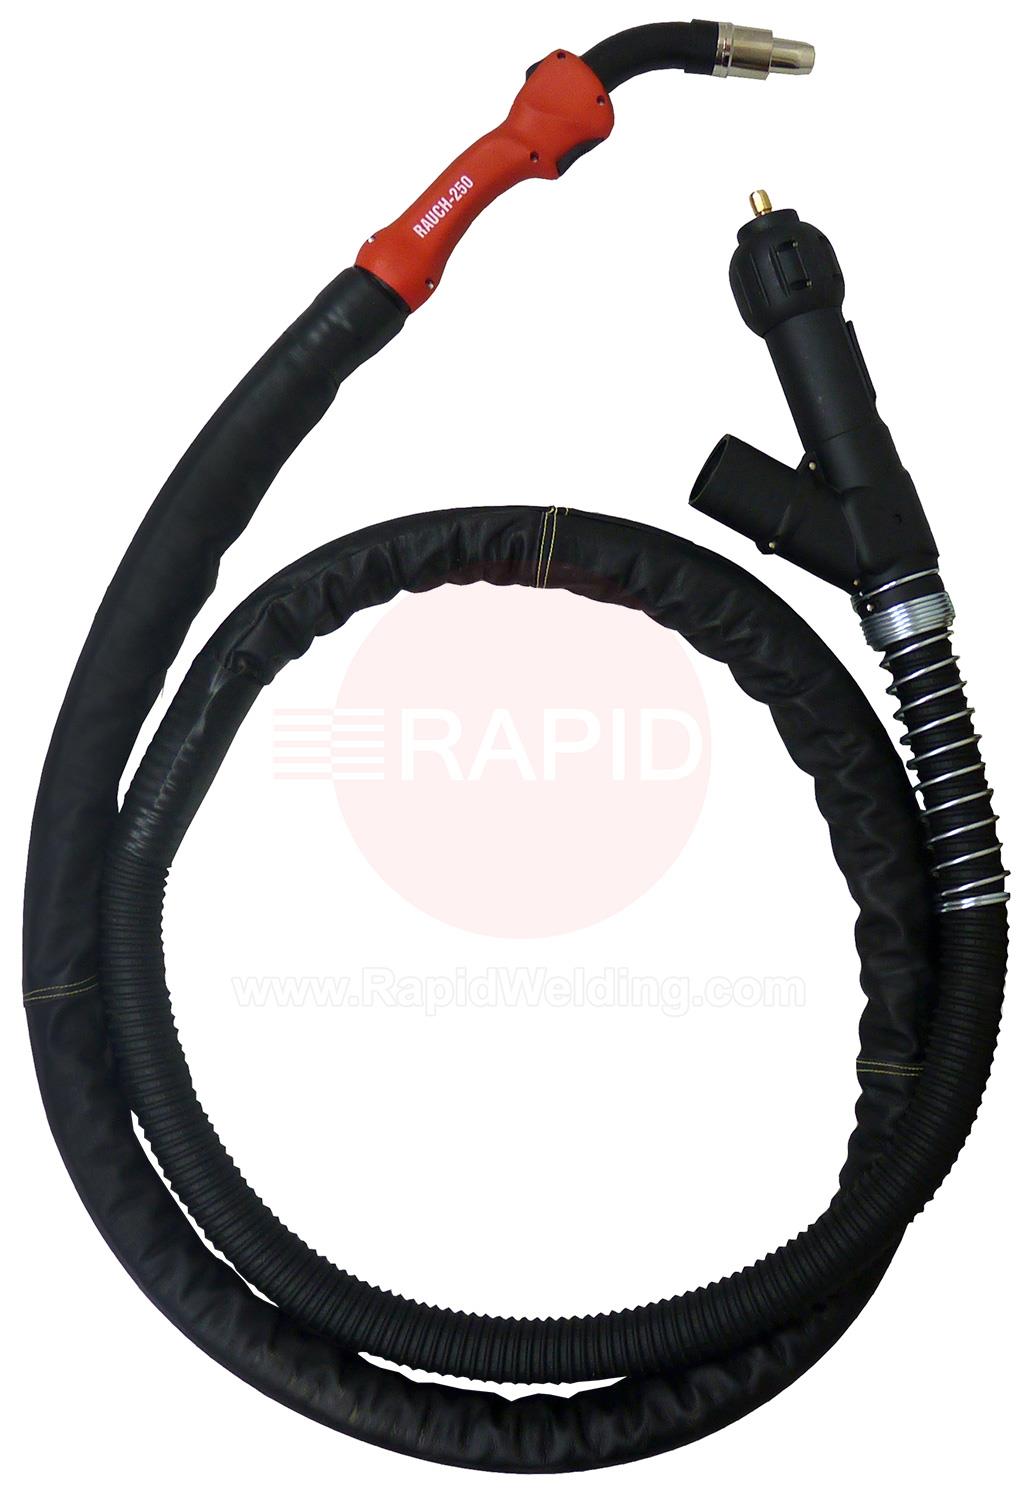 R2500311  MHS Smoke-250 Fume Extraction Air Cooled MIG Torch, 250A with Exhaust & Euro Connection - 3m